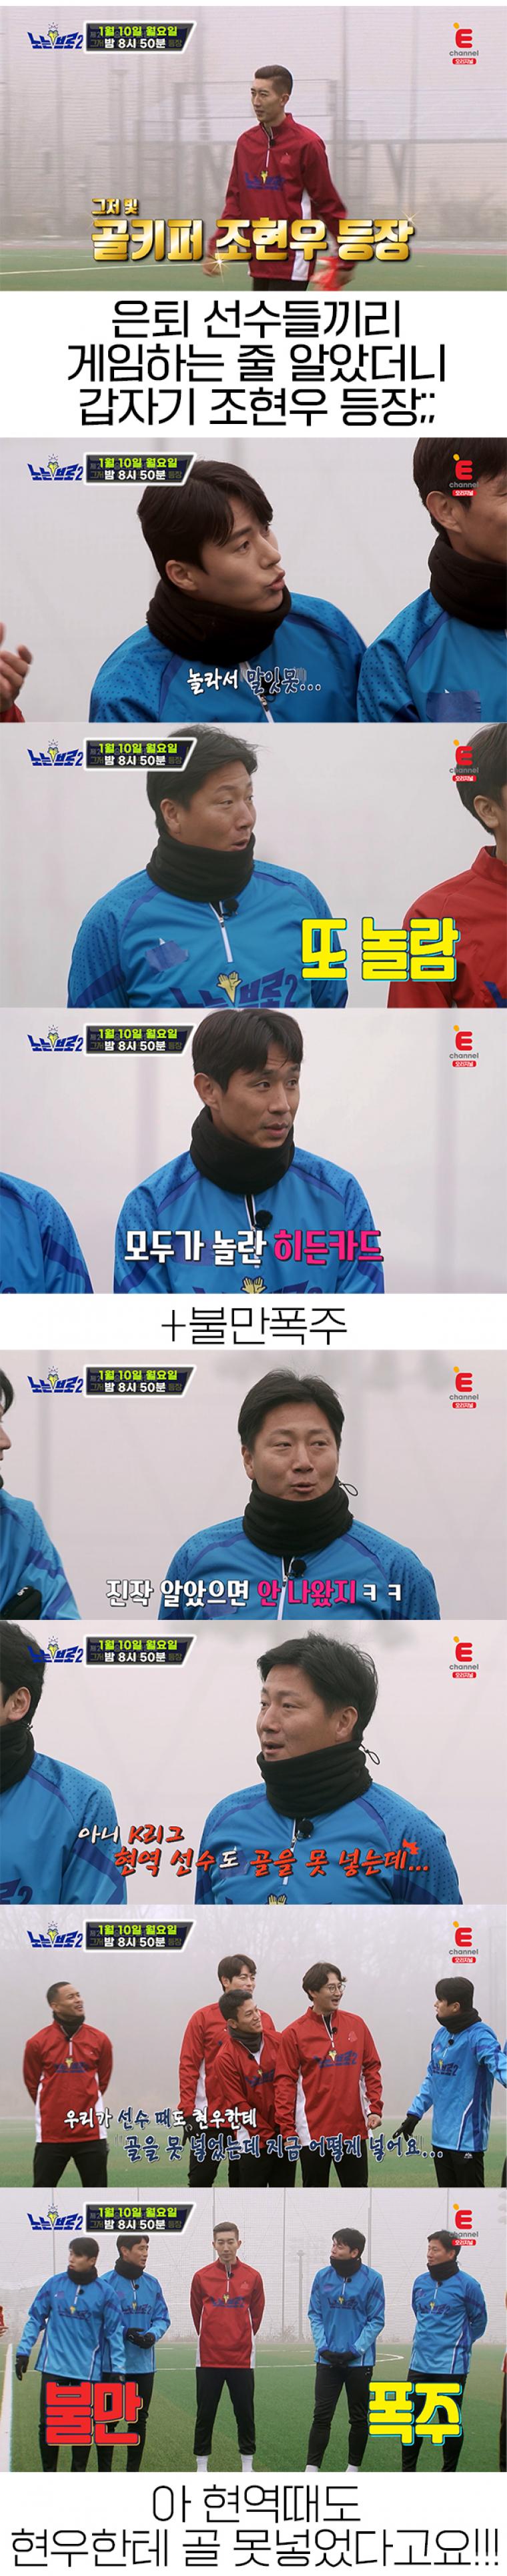 Soccer players complained about Cho Hyunwoo's appearance.jpg